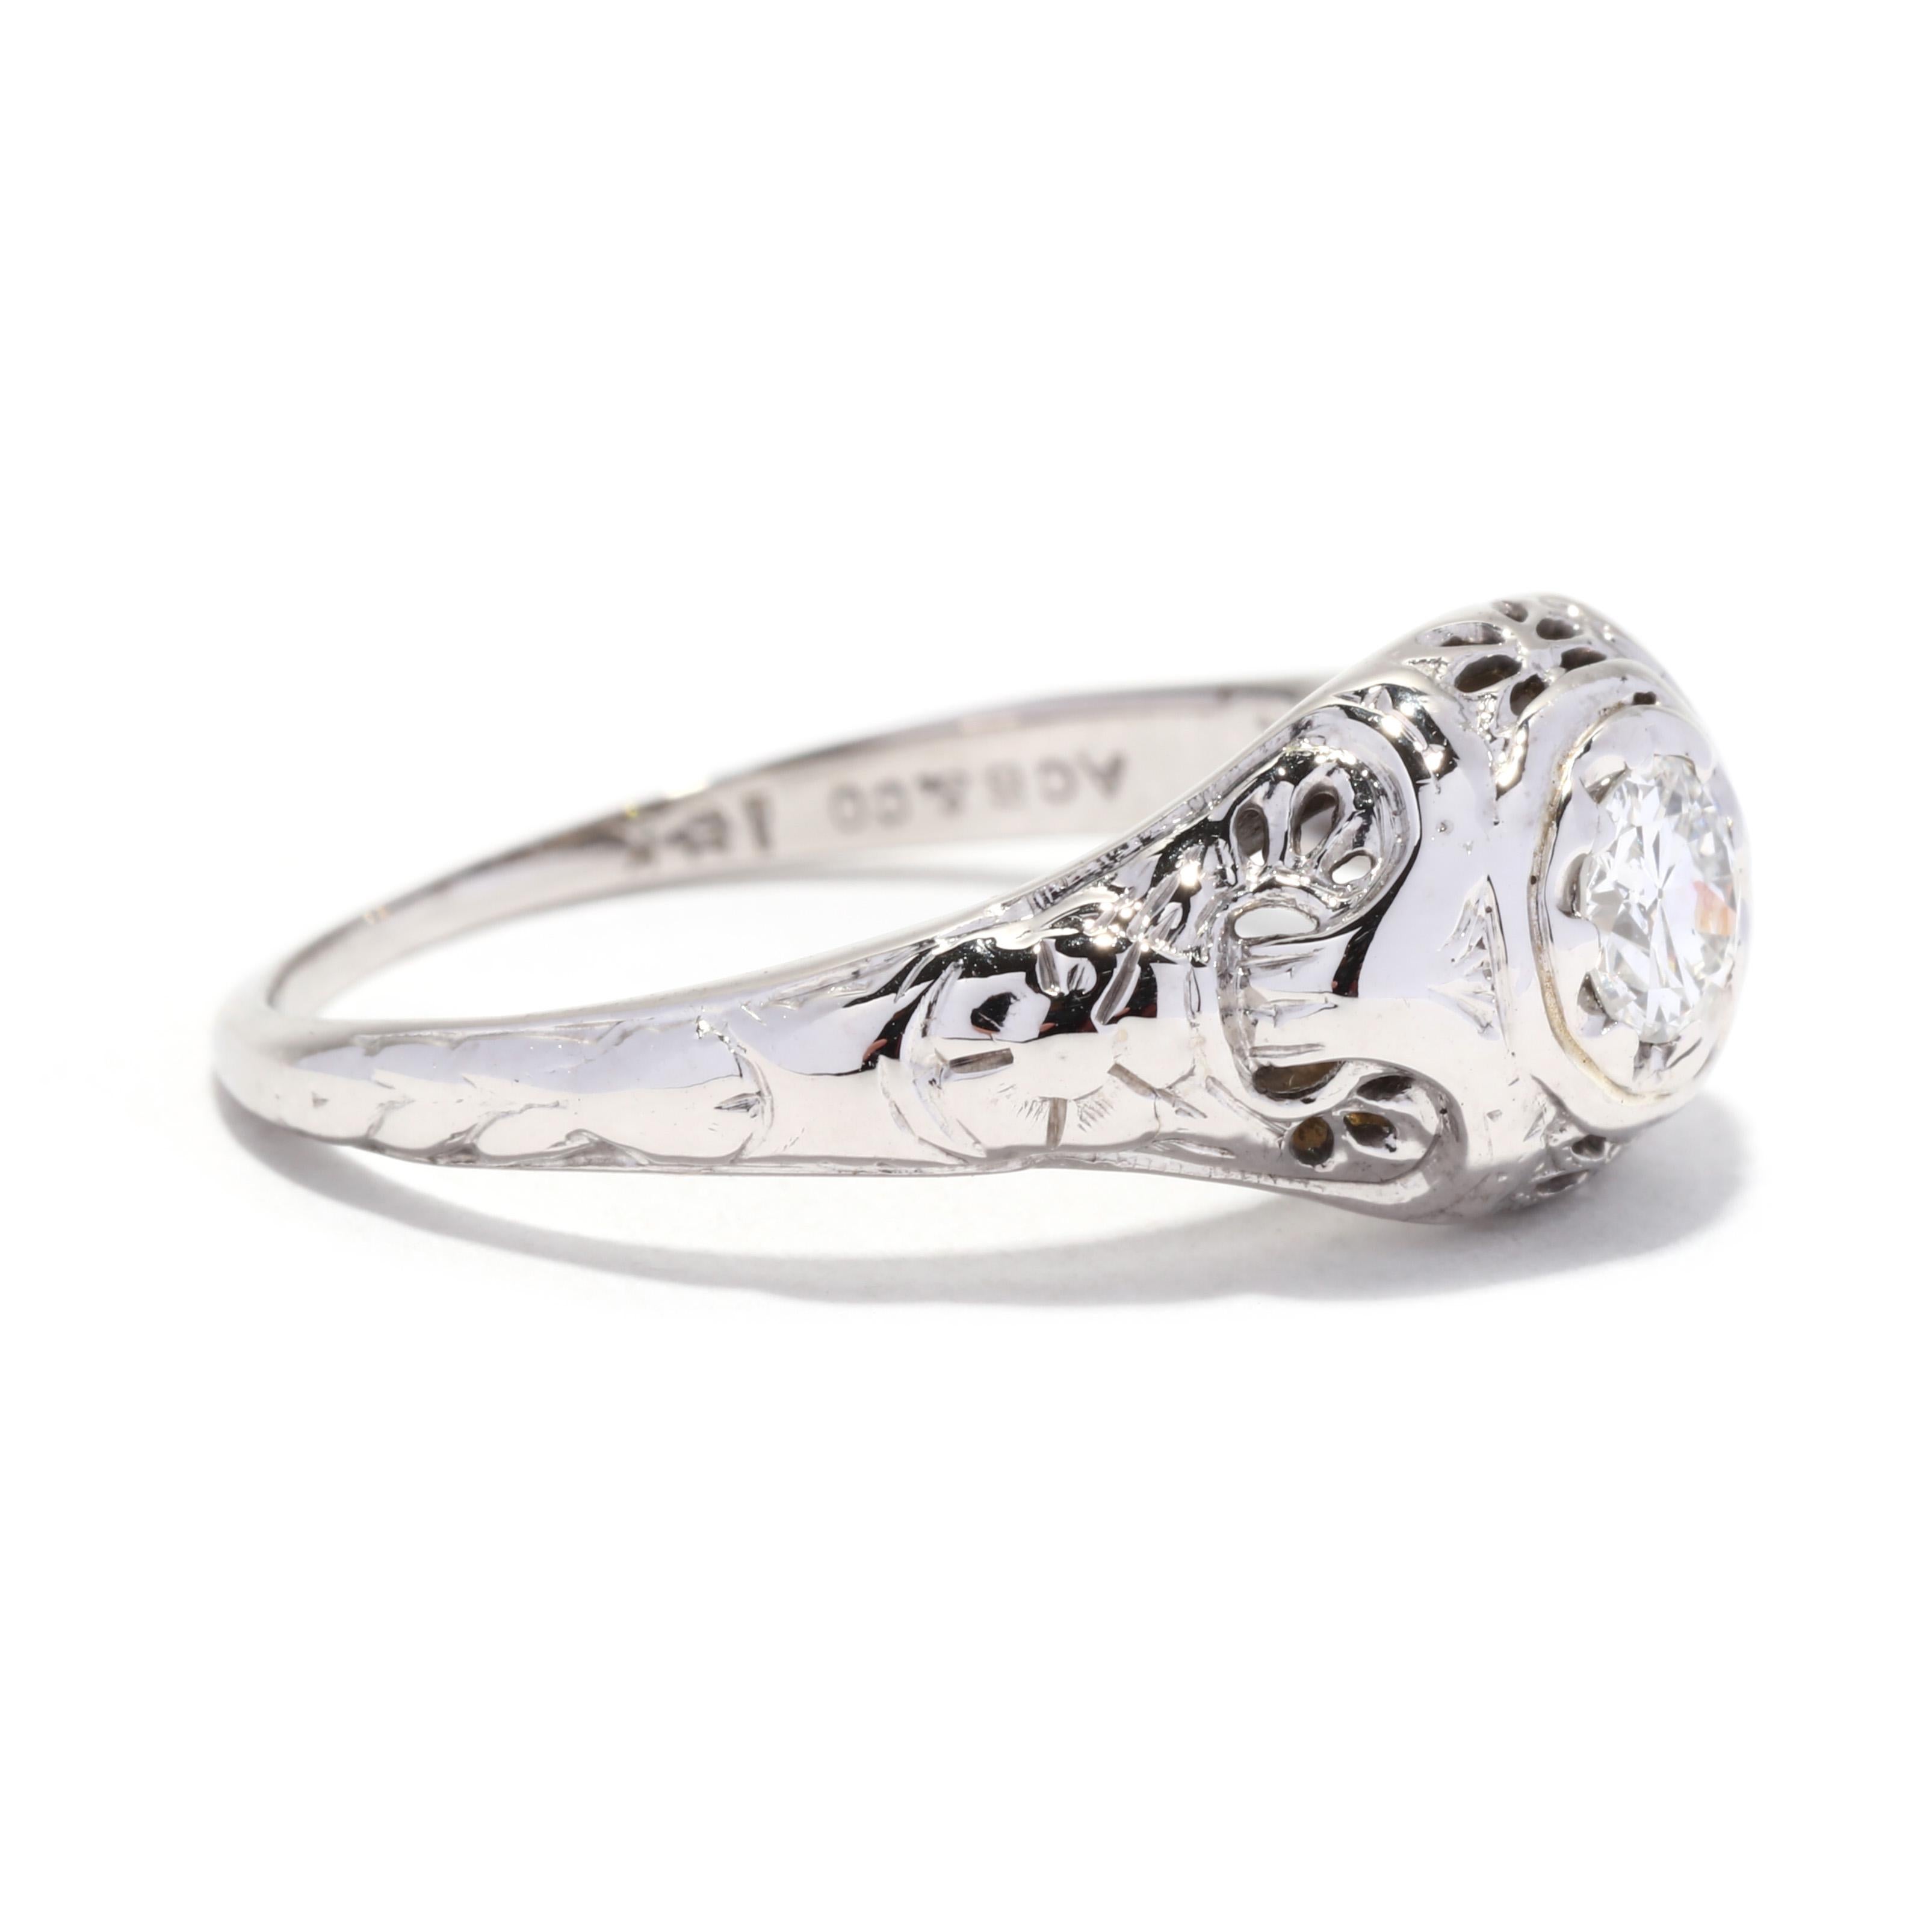 An Art Deco 18 karat white gold old European cut diamond engagement ring. This classic engagement ring features an old European cut diamond weighing approximately .36 carat set in a tapered floral filigree and engraved mounting.

Stones:
- diamond,